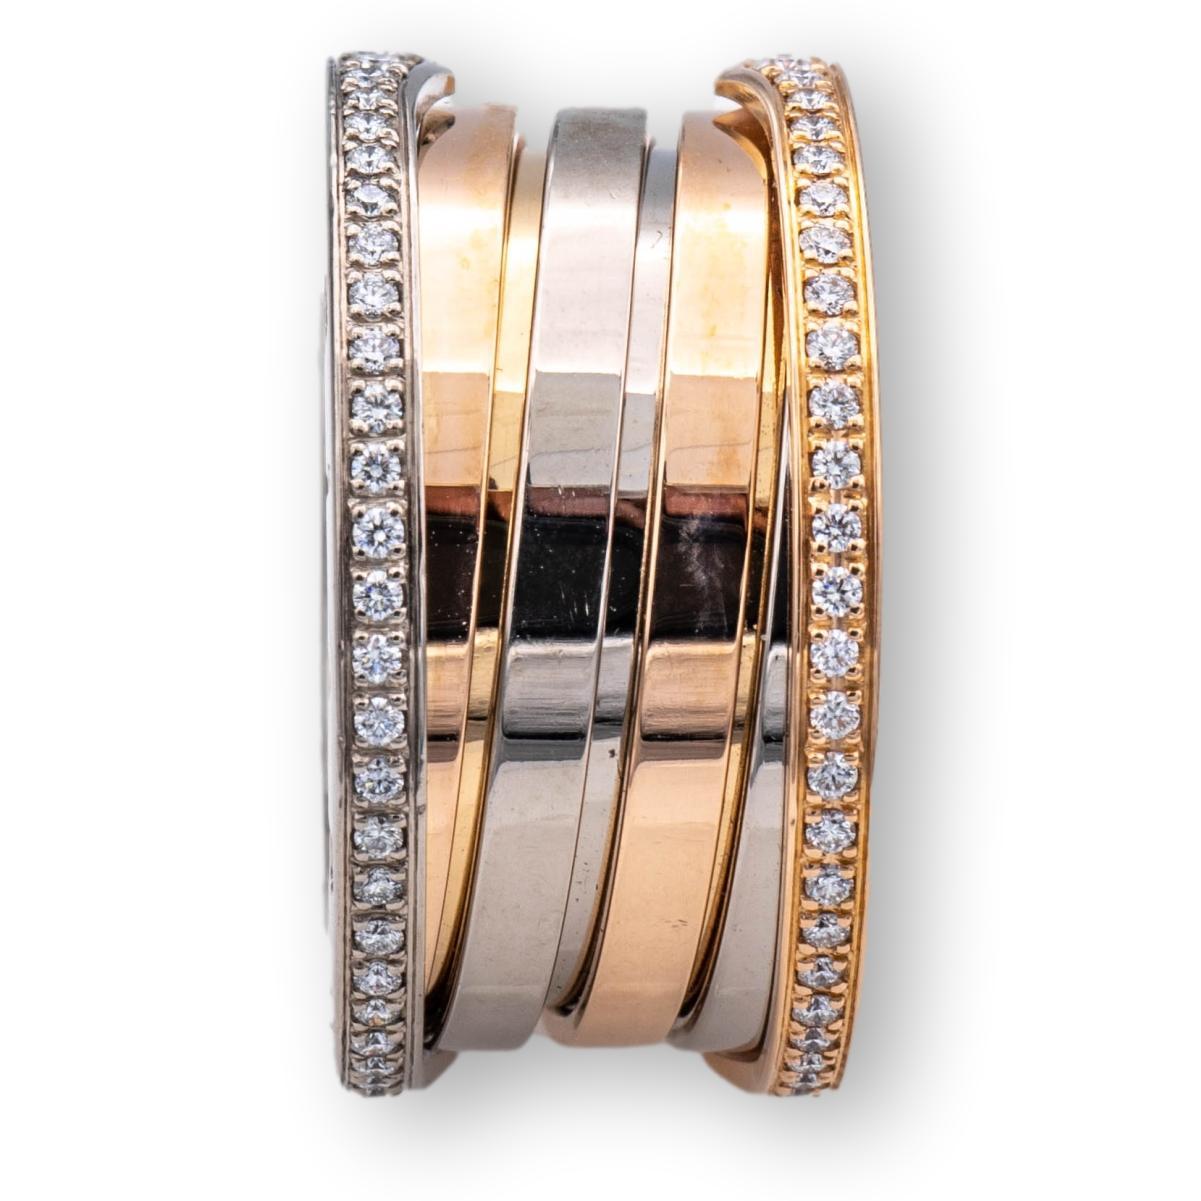 Bvlgari B-Zero band ring from the Labyrinth collection finely crafted in 18 karat rose and white gold studded with 2 rows of bead set round brilliant cut diamonds at each edge weighing 0.57 carats total weight approximately. 
All hallmarks are